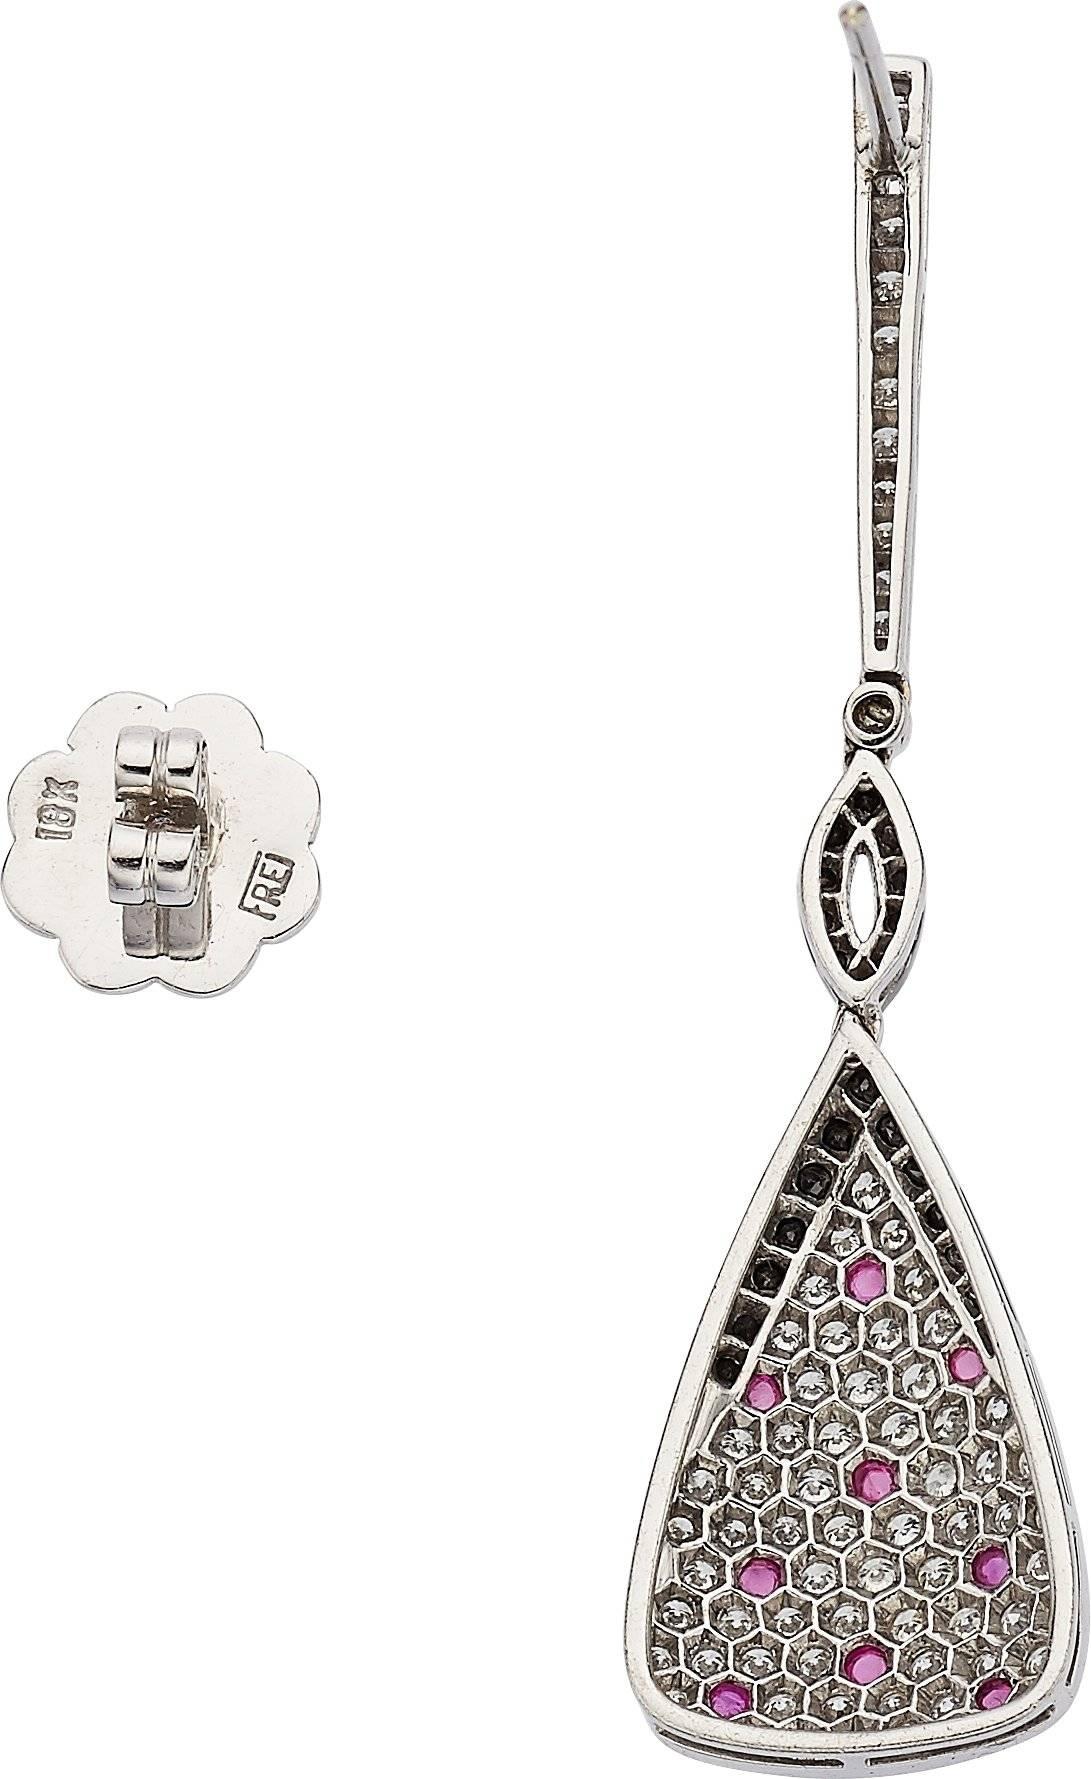 A fun pair of drop earrings by designer Eli Frei. There are 0.40 carats of black diamonds with 1.60 carats of white diamonds and 0.33 carats of round cut cabochon rubies. Set in 18K white gold.

Earring Length: 2.10 inches
Earring Width: 0.50 inches